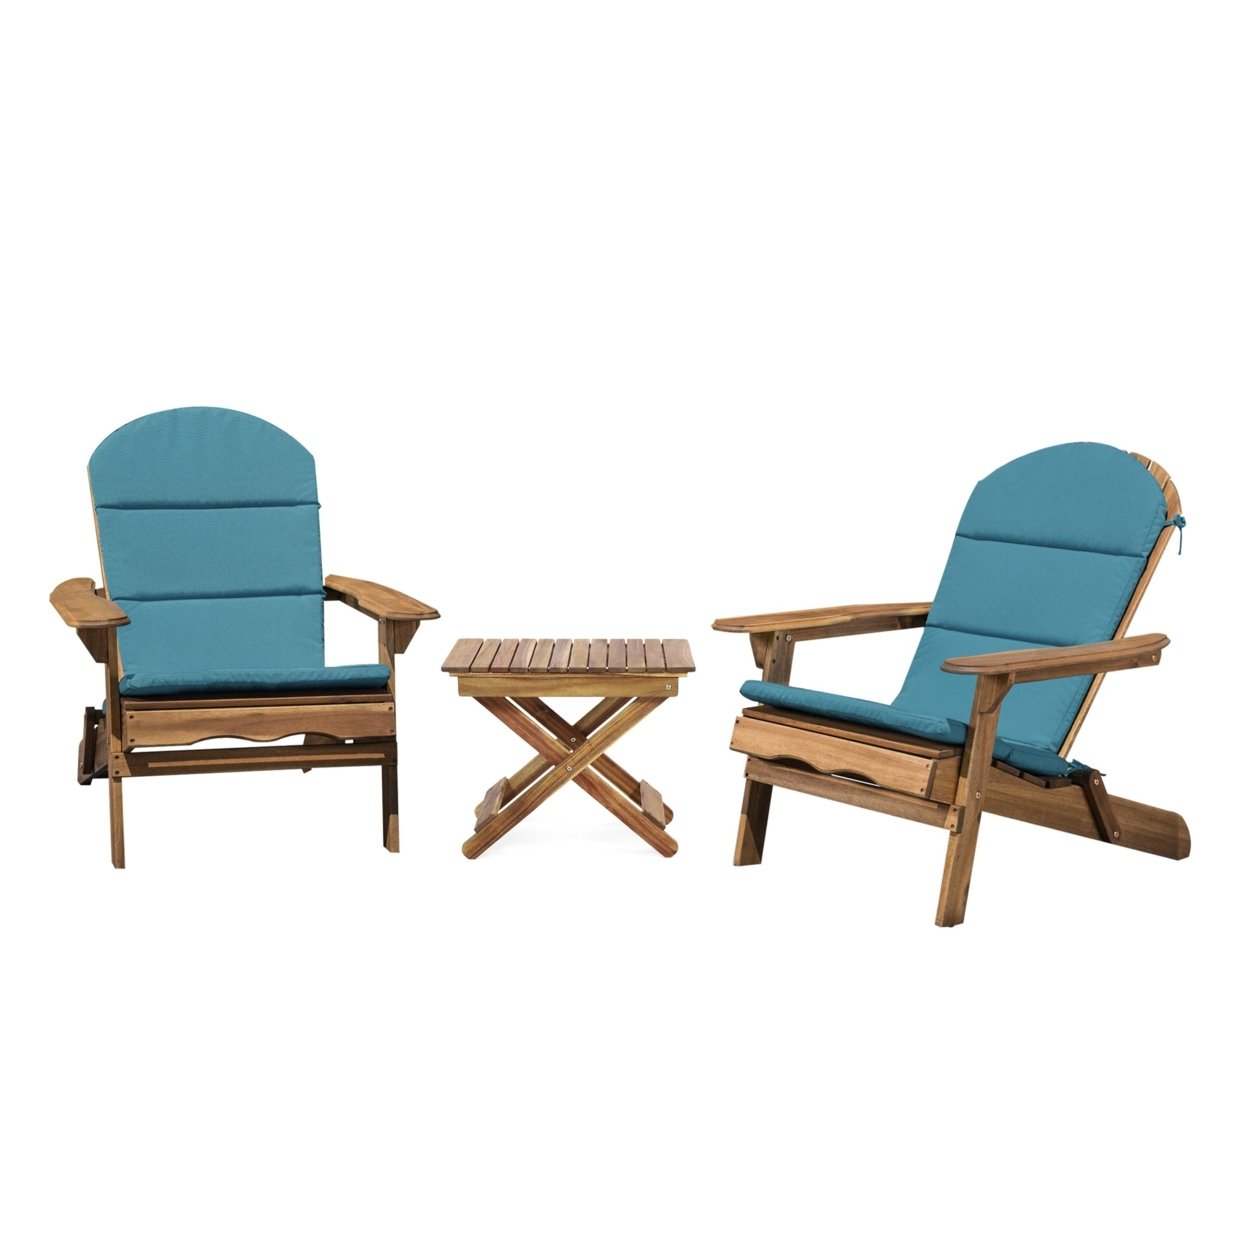 Reed Outdoor 2 Seater Acacia Wood Chat Set With Water Resistant Cushions - Navy Blue/dark Teal